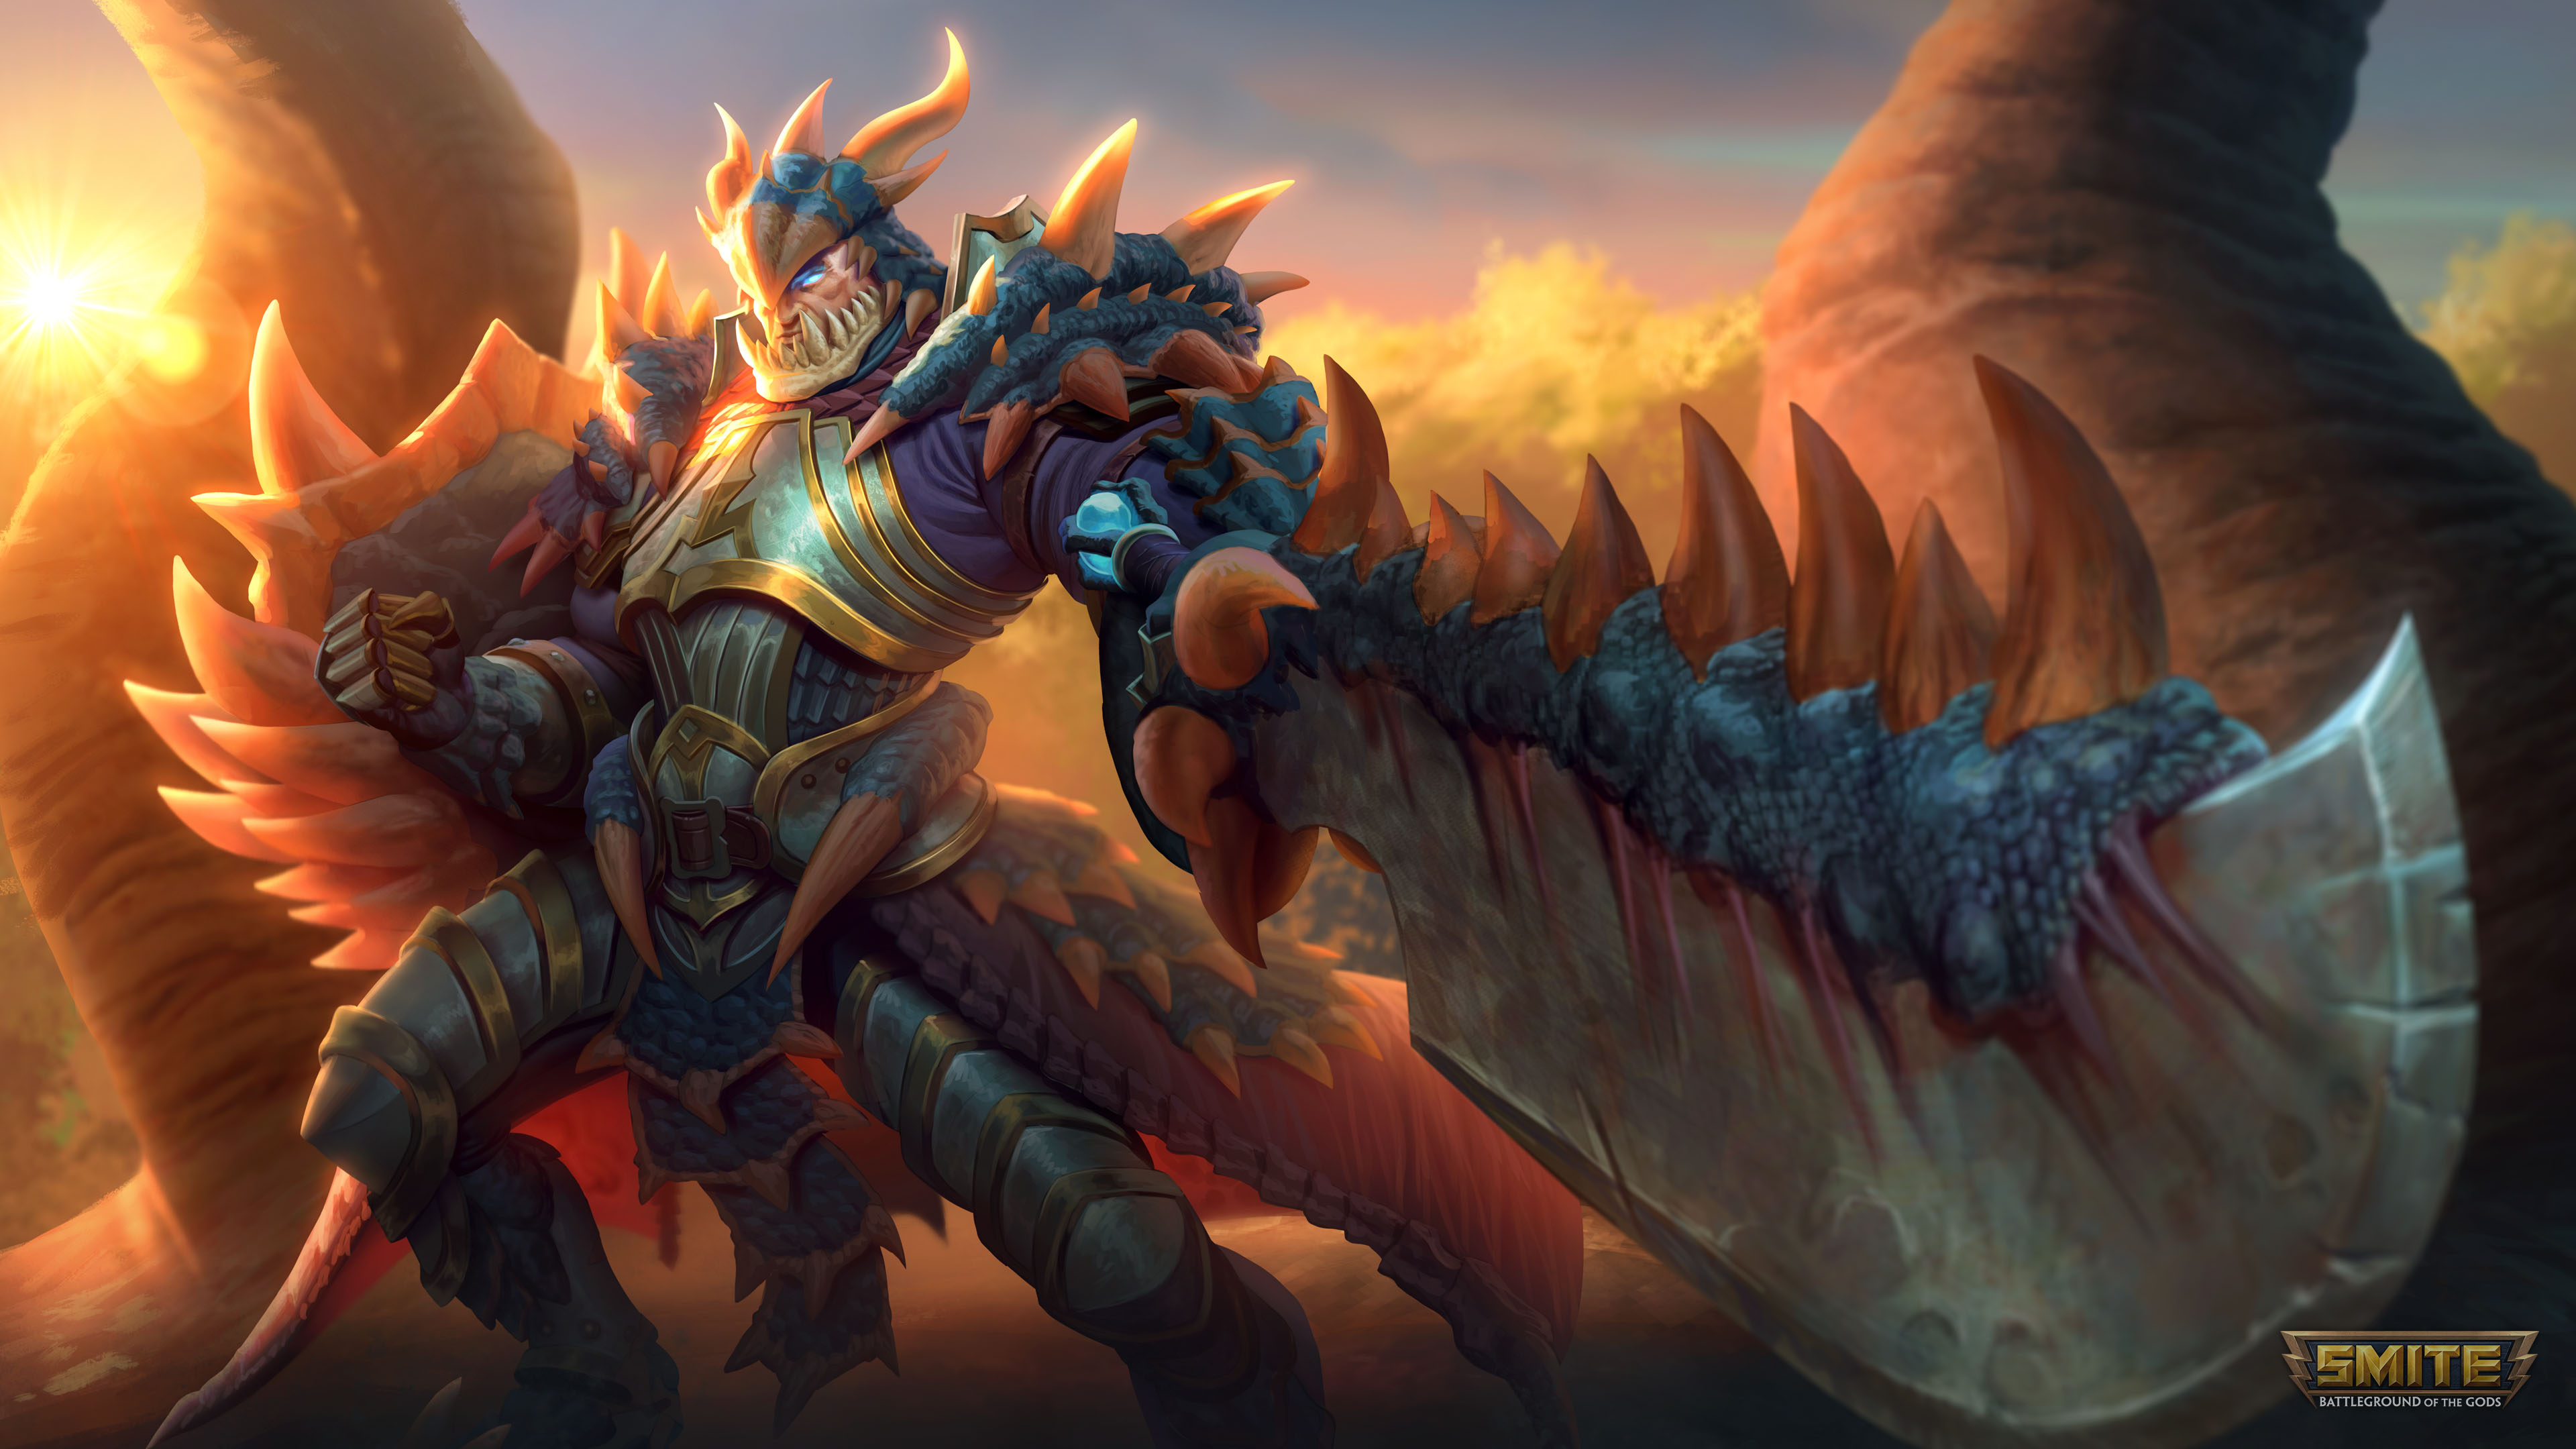 Video Game Smite HD Wallpaper | Background Image